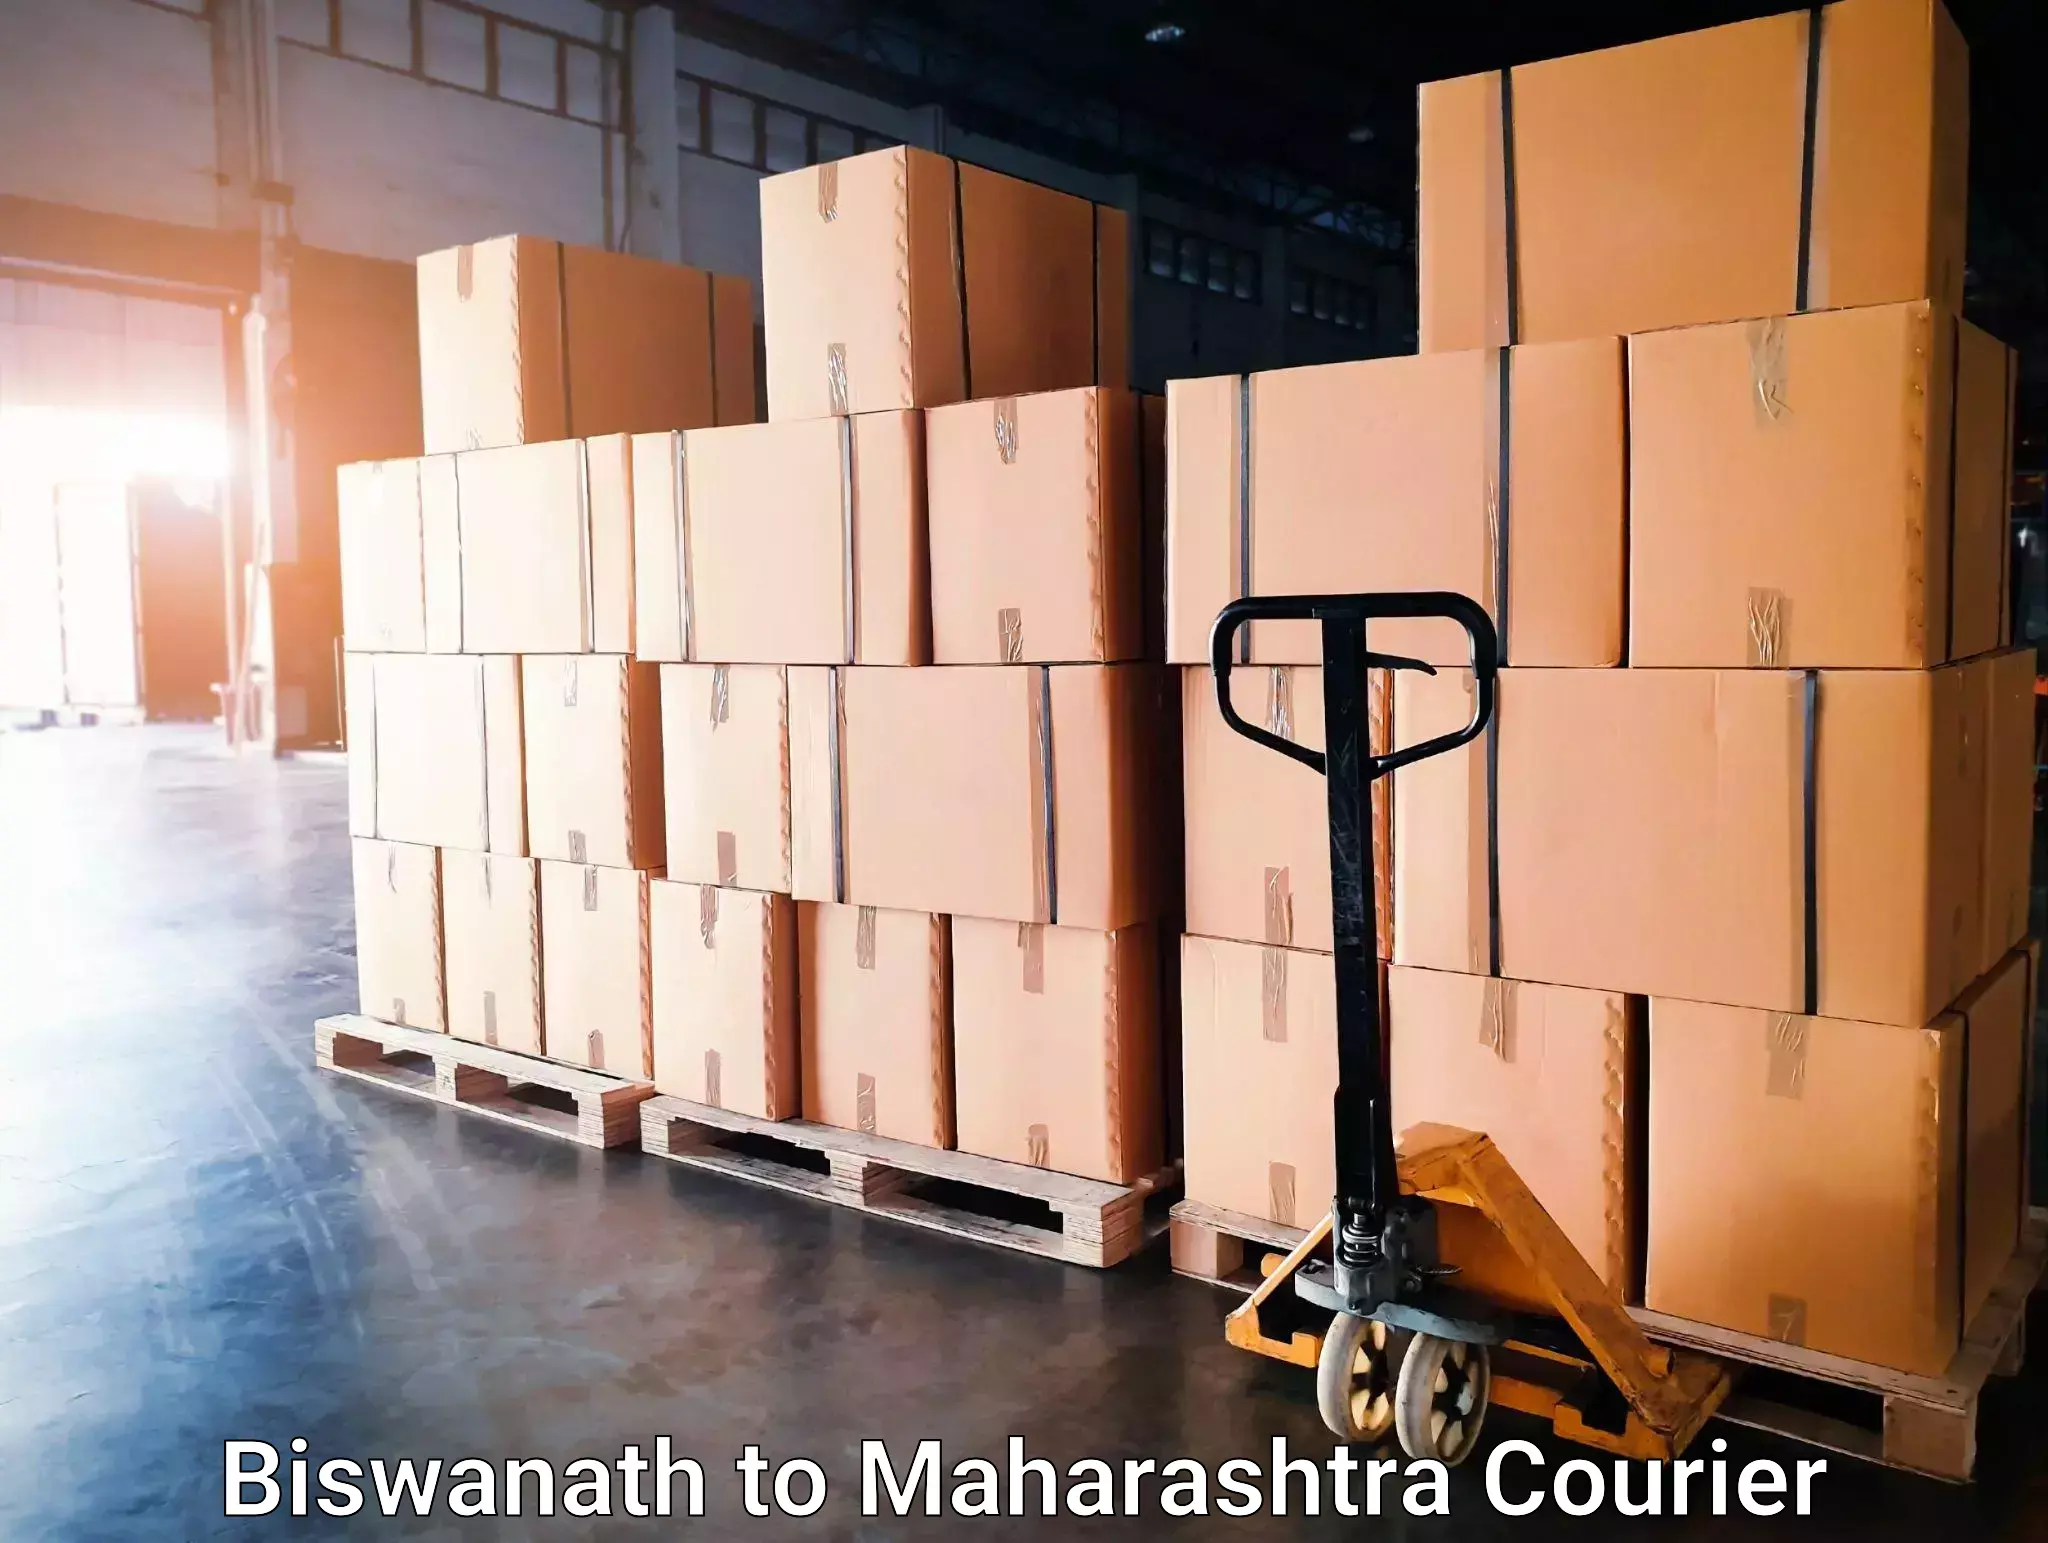 Courier app Biswanath to Bhiwandi